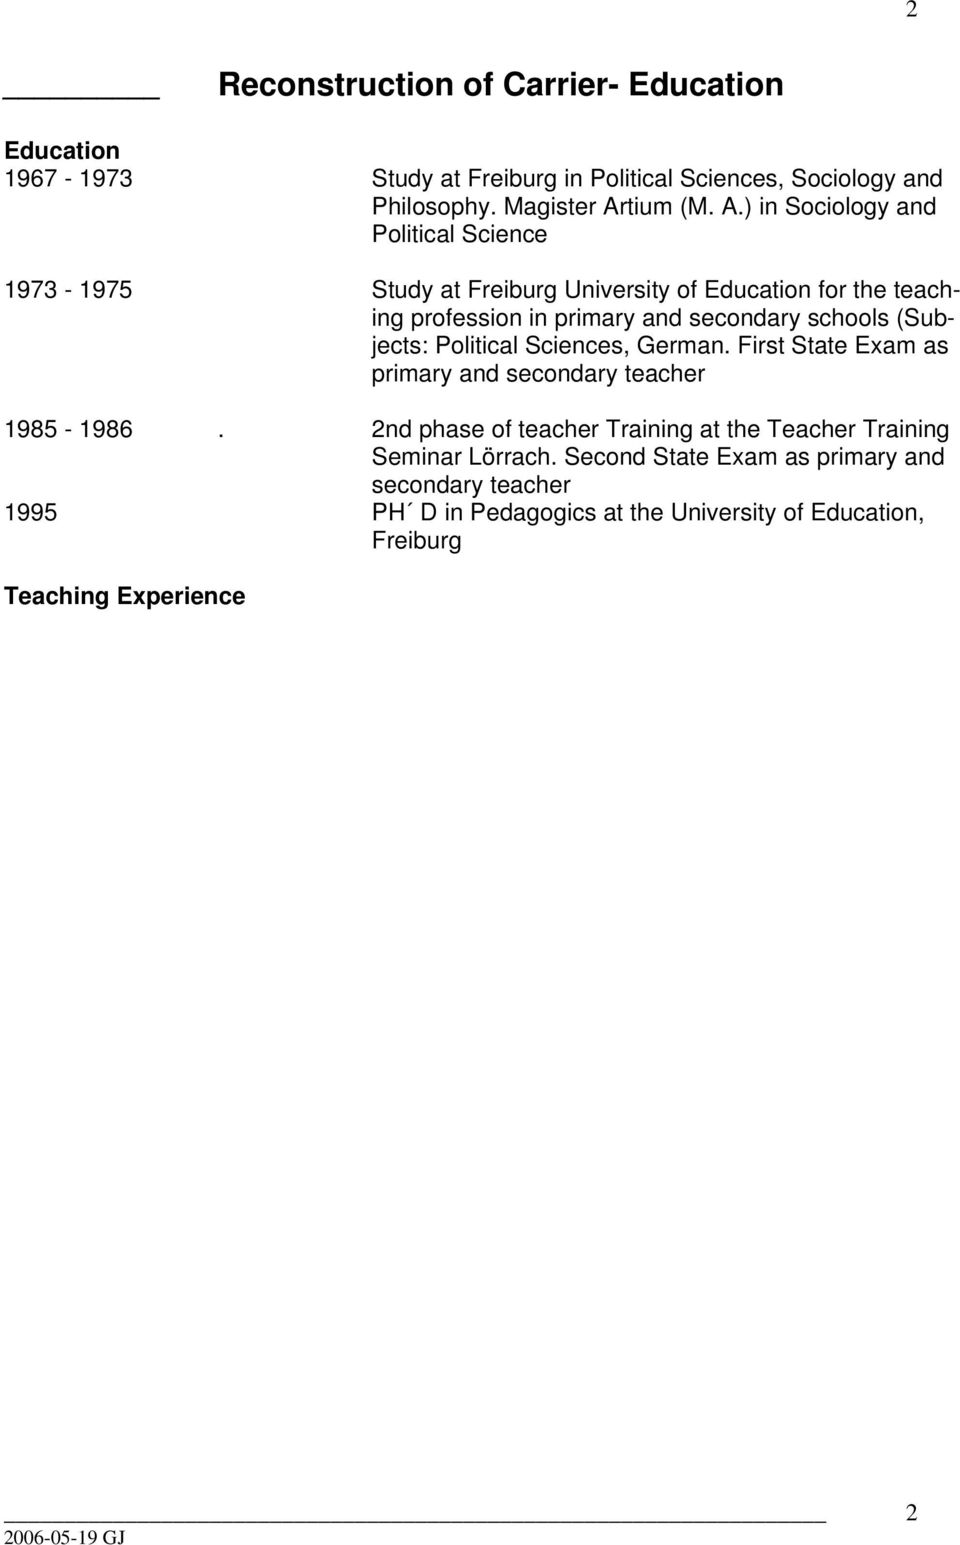 ) in Sociology and Political Science 1973-1975 Study at Freiburg University of Education for the teaching profession in primary and secondary schools